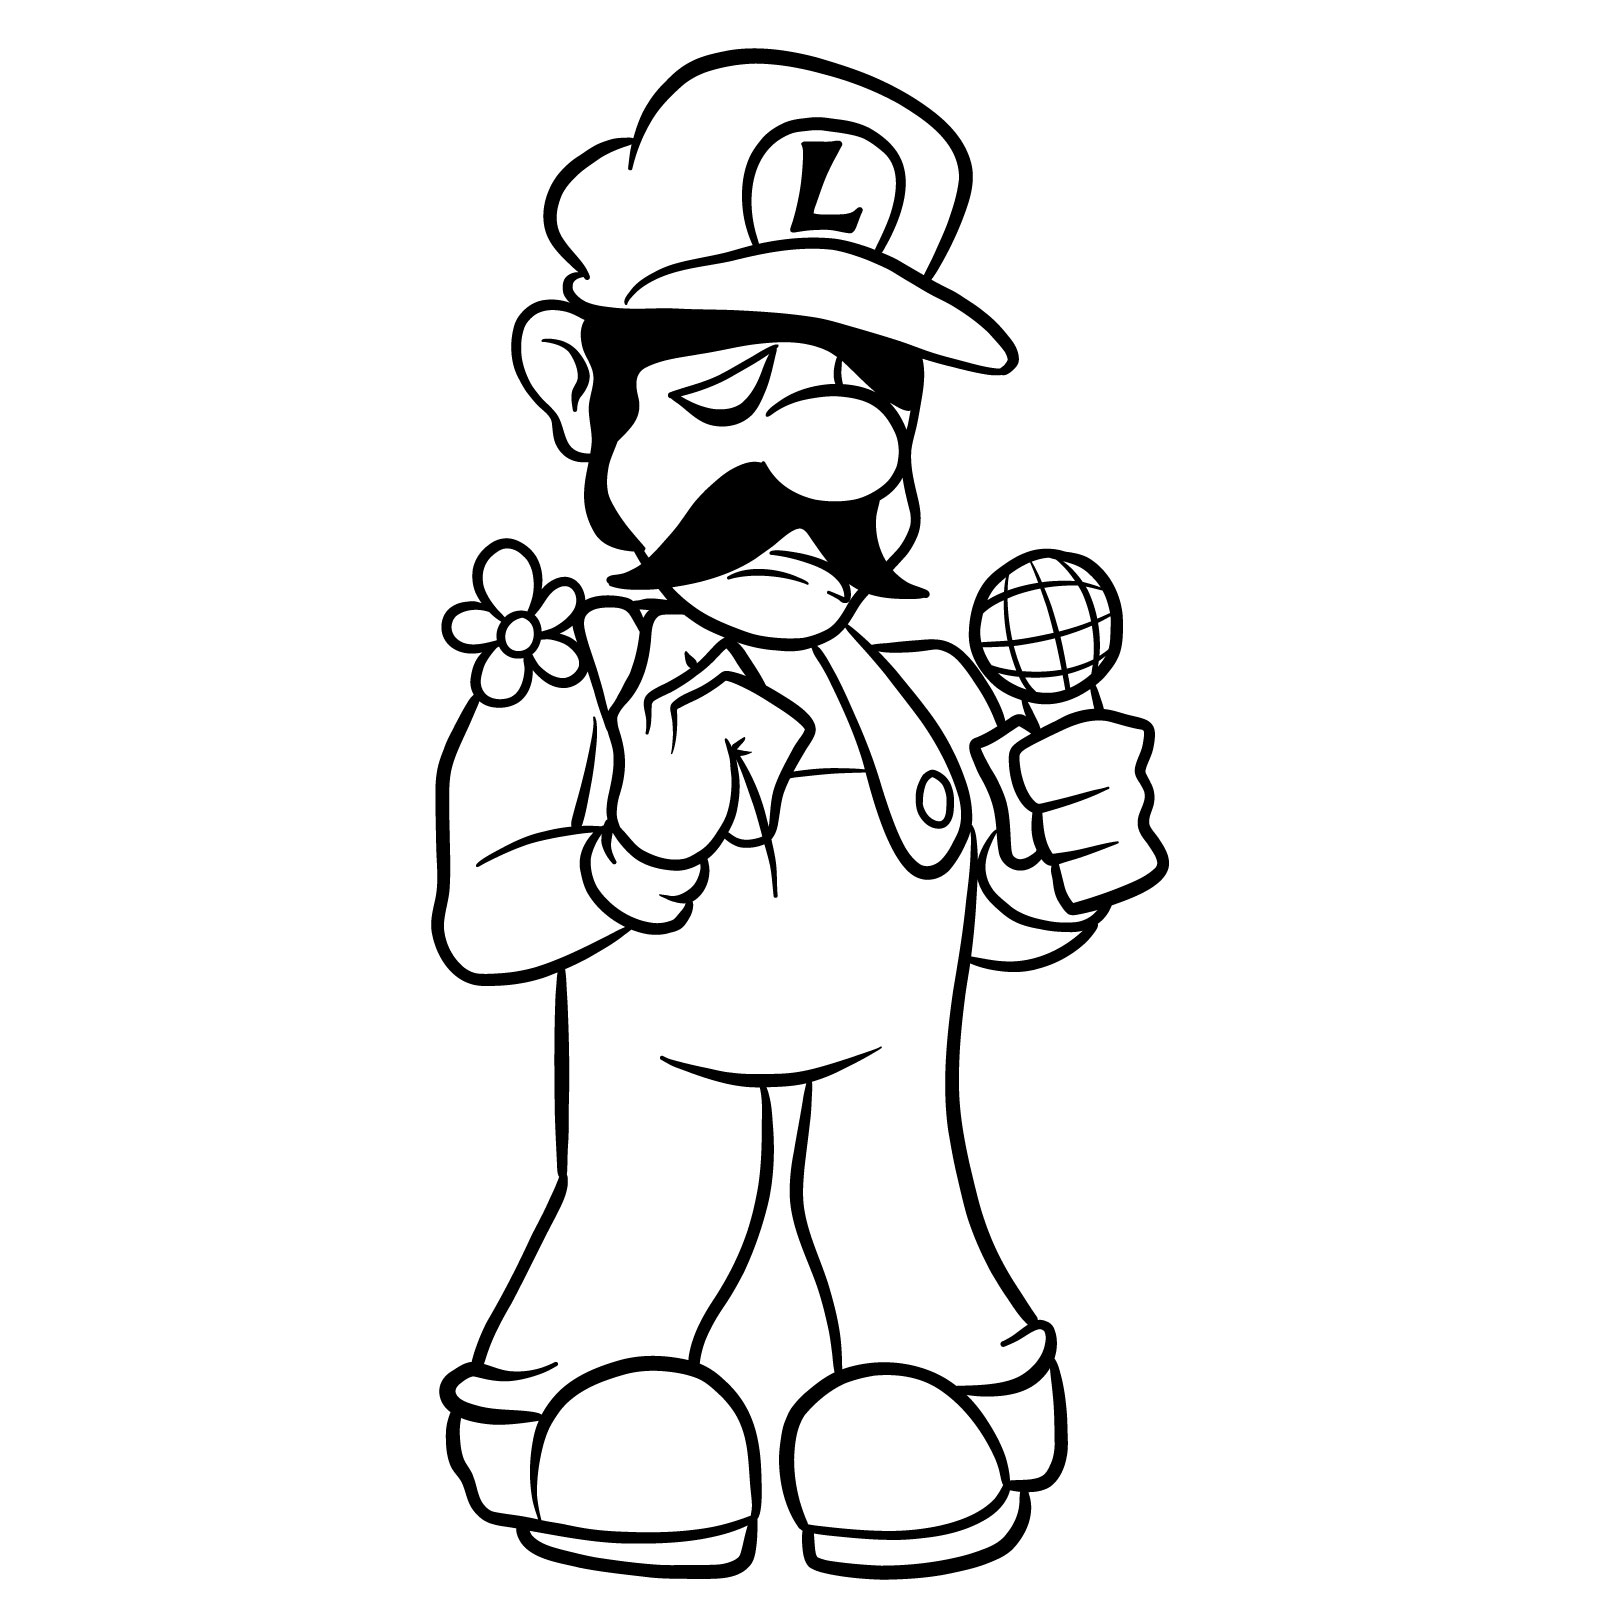 How to draw Beta Luigi from FNF - final step